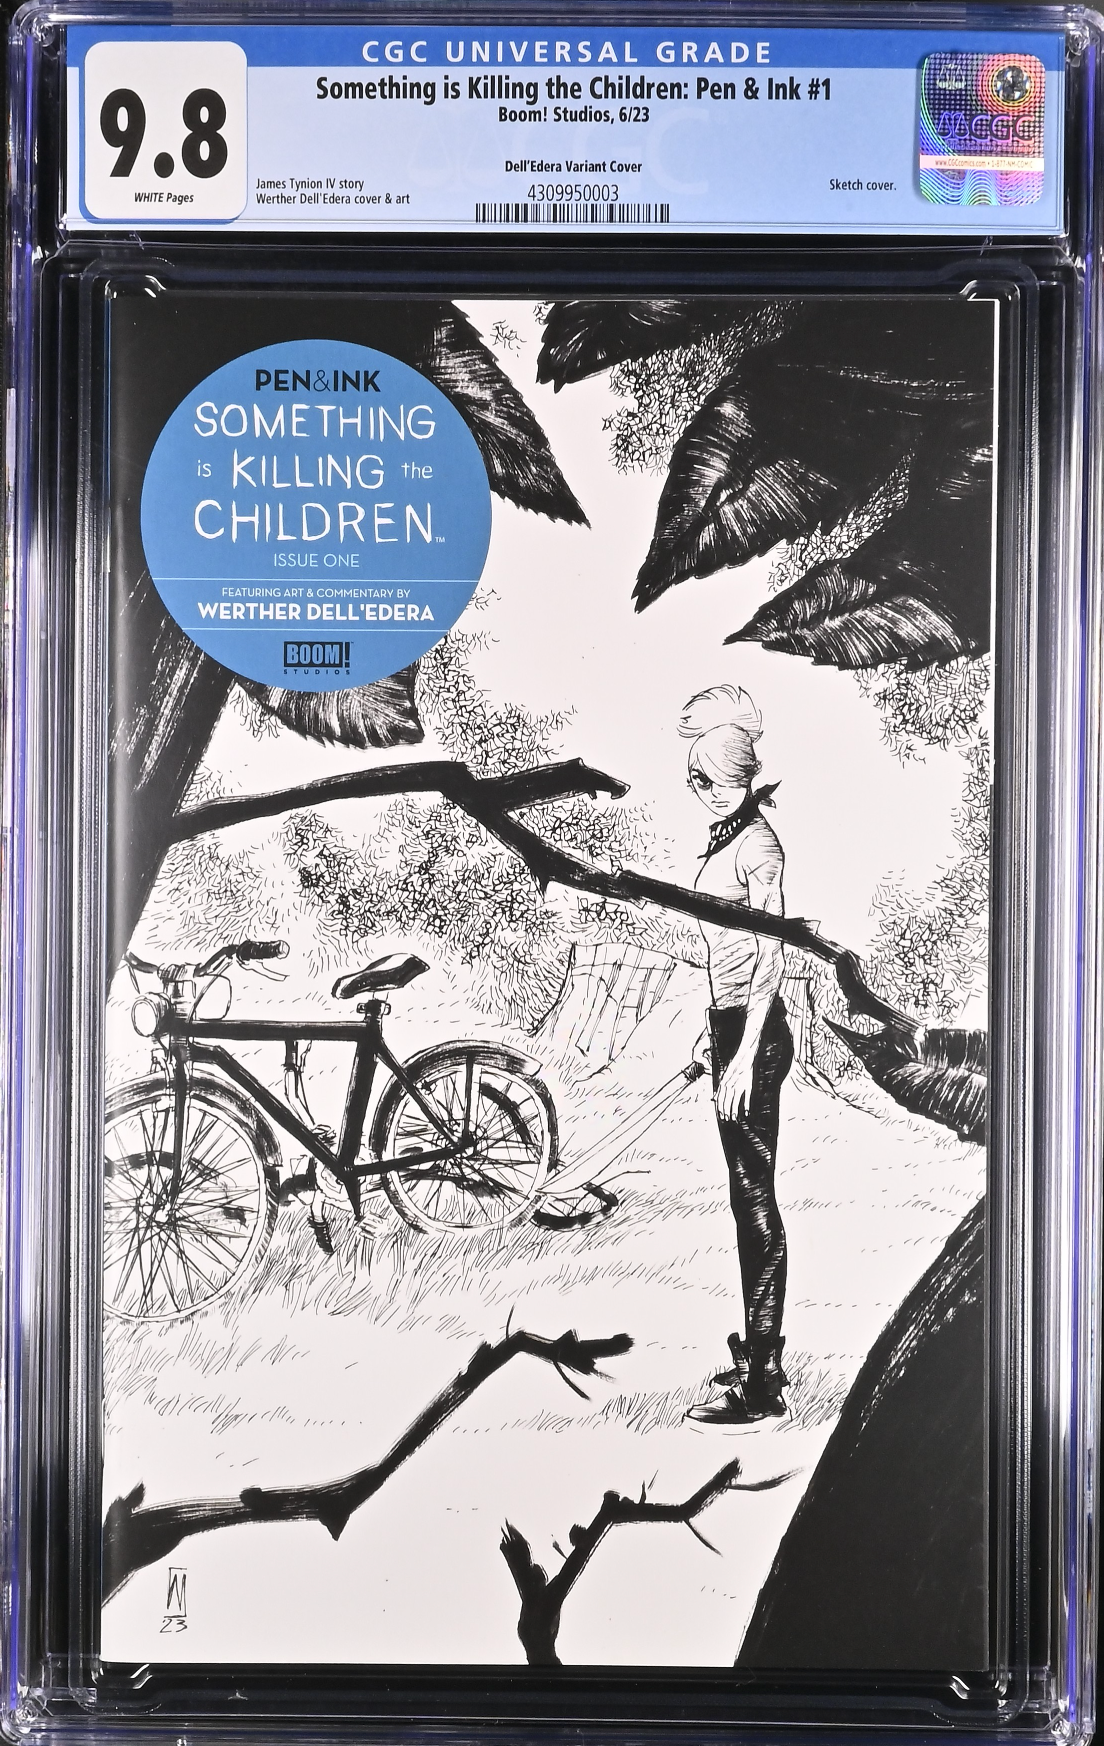 Something is Killing the Children: Pen & Ink #1 SDCC Variant CGC 9.8